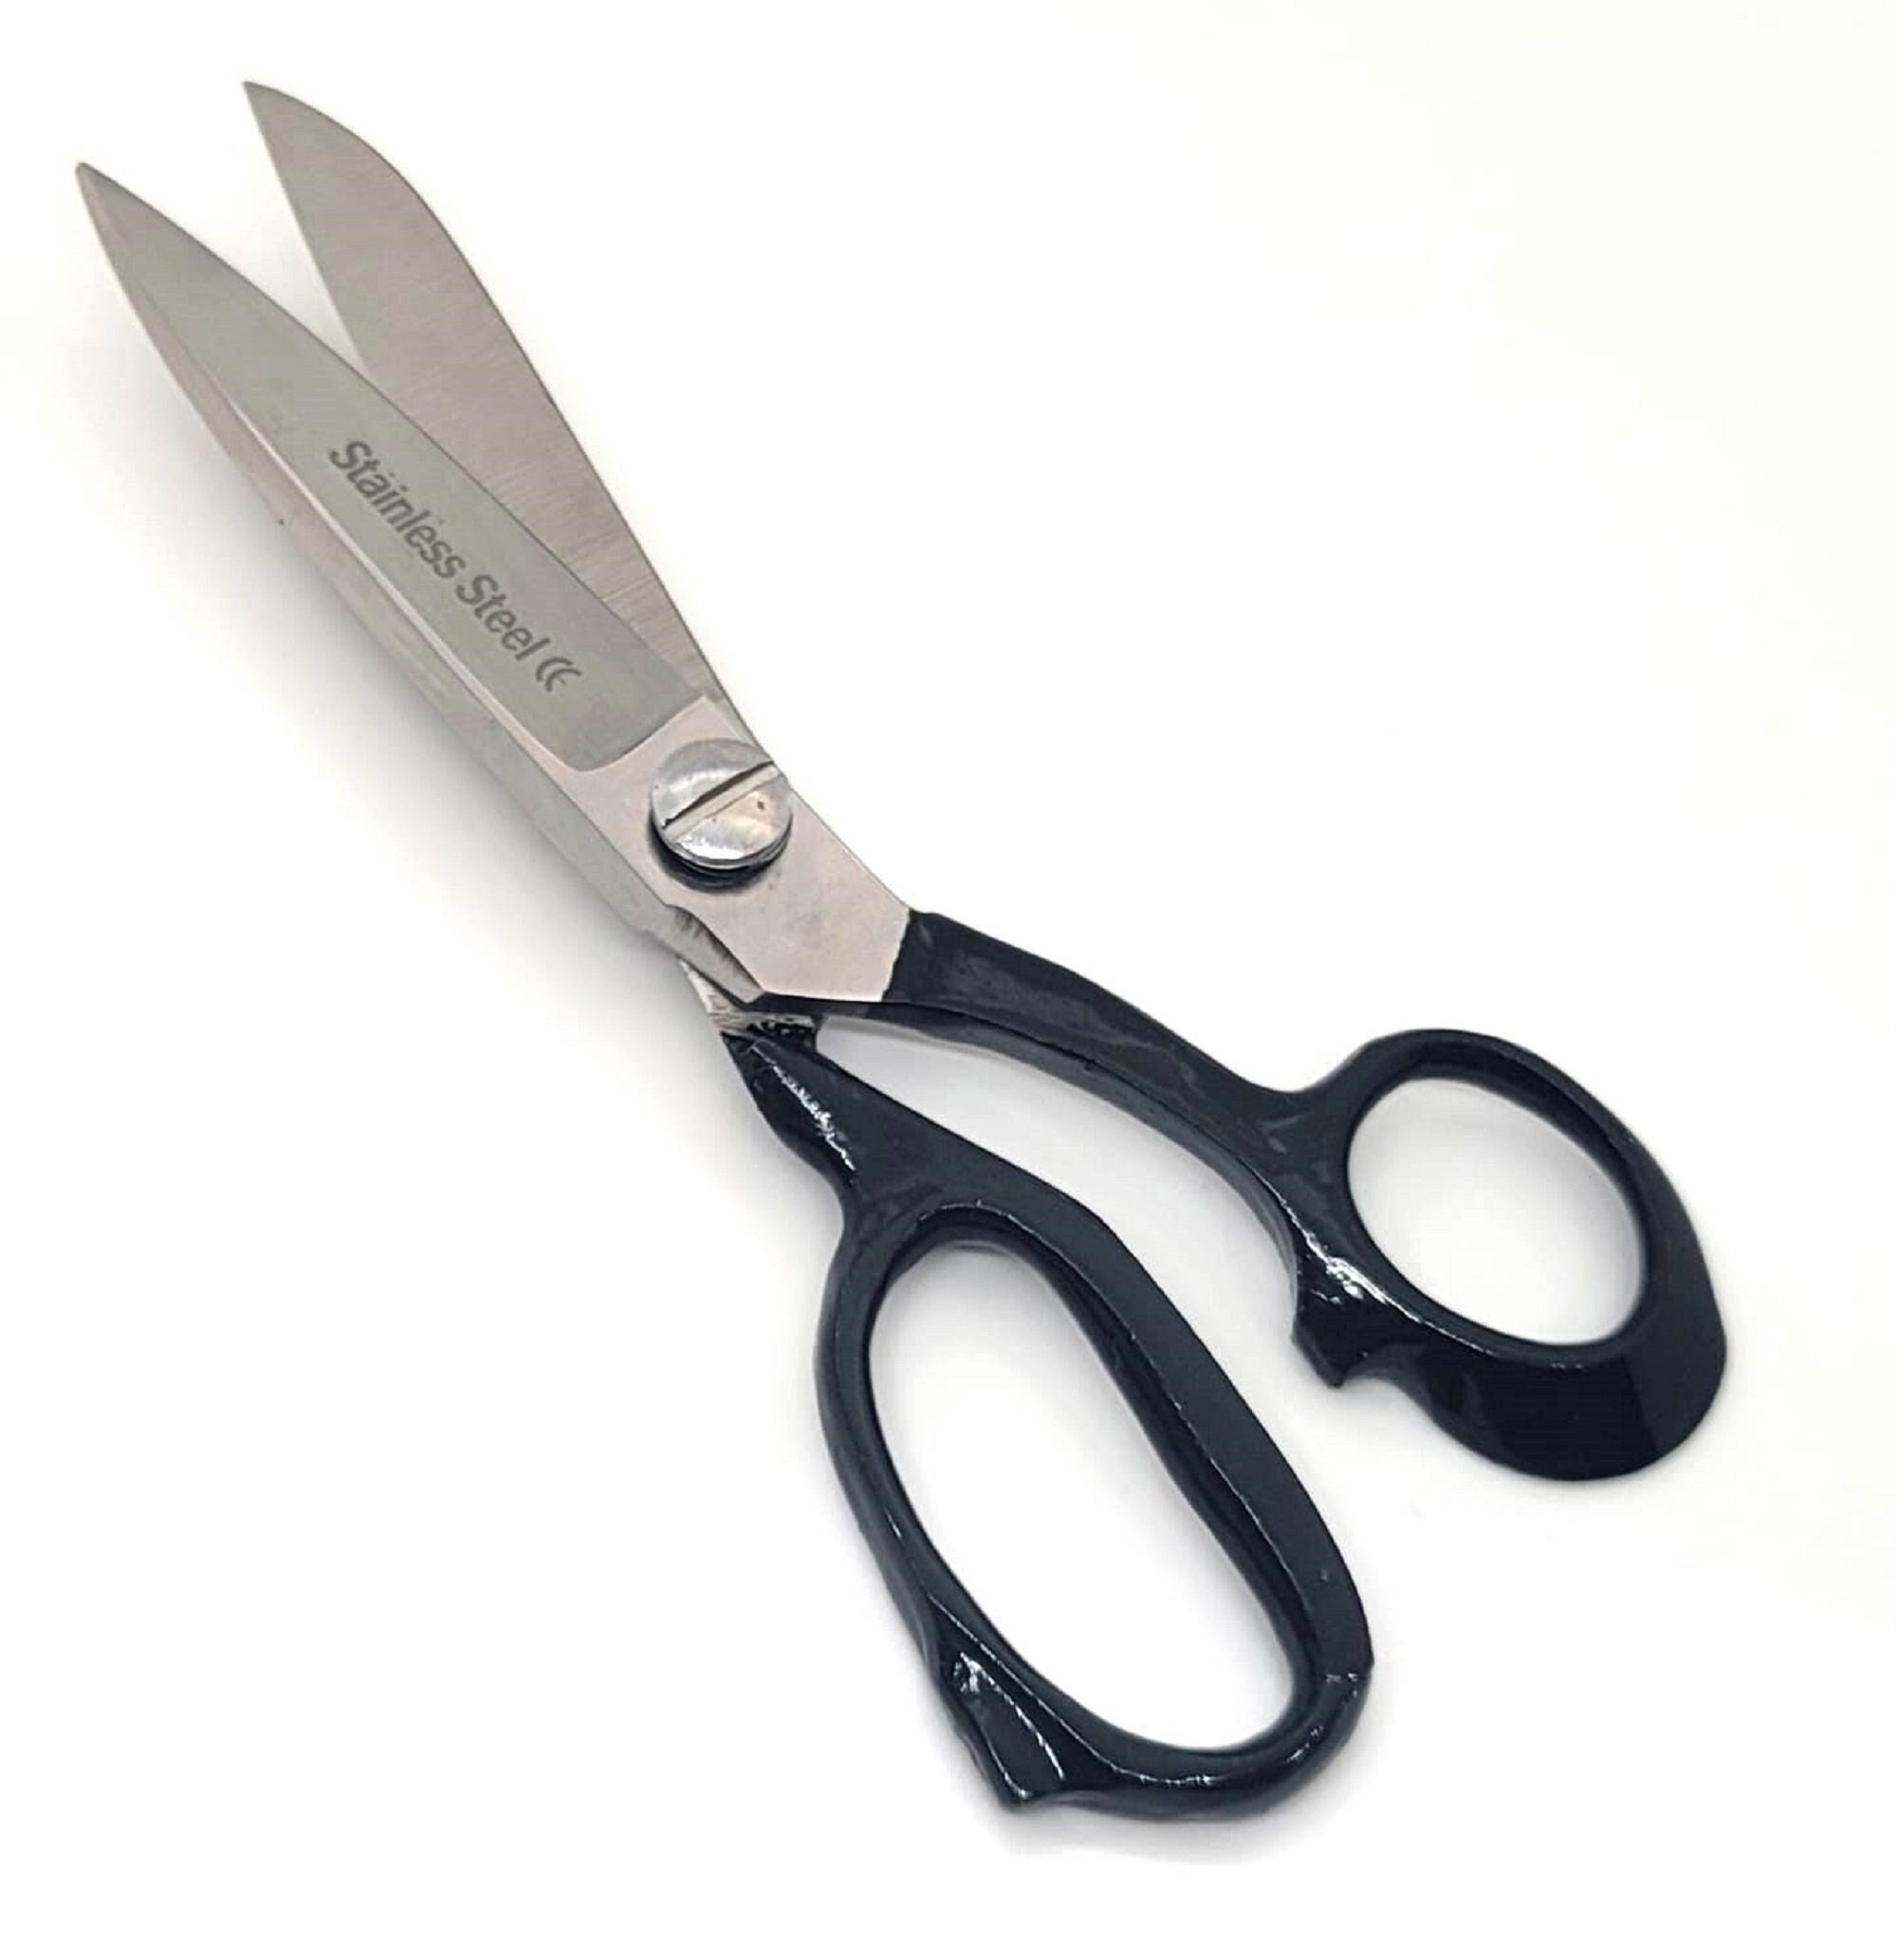 HEAVY DUTY INDUSTRIAL / UPHOLSTERY SHEARS TAILOR SCISSORS Fabric Leather  Sharp